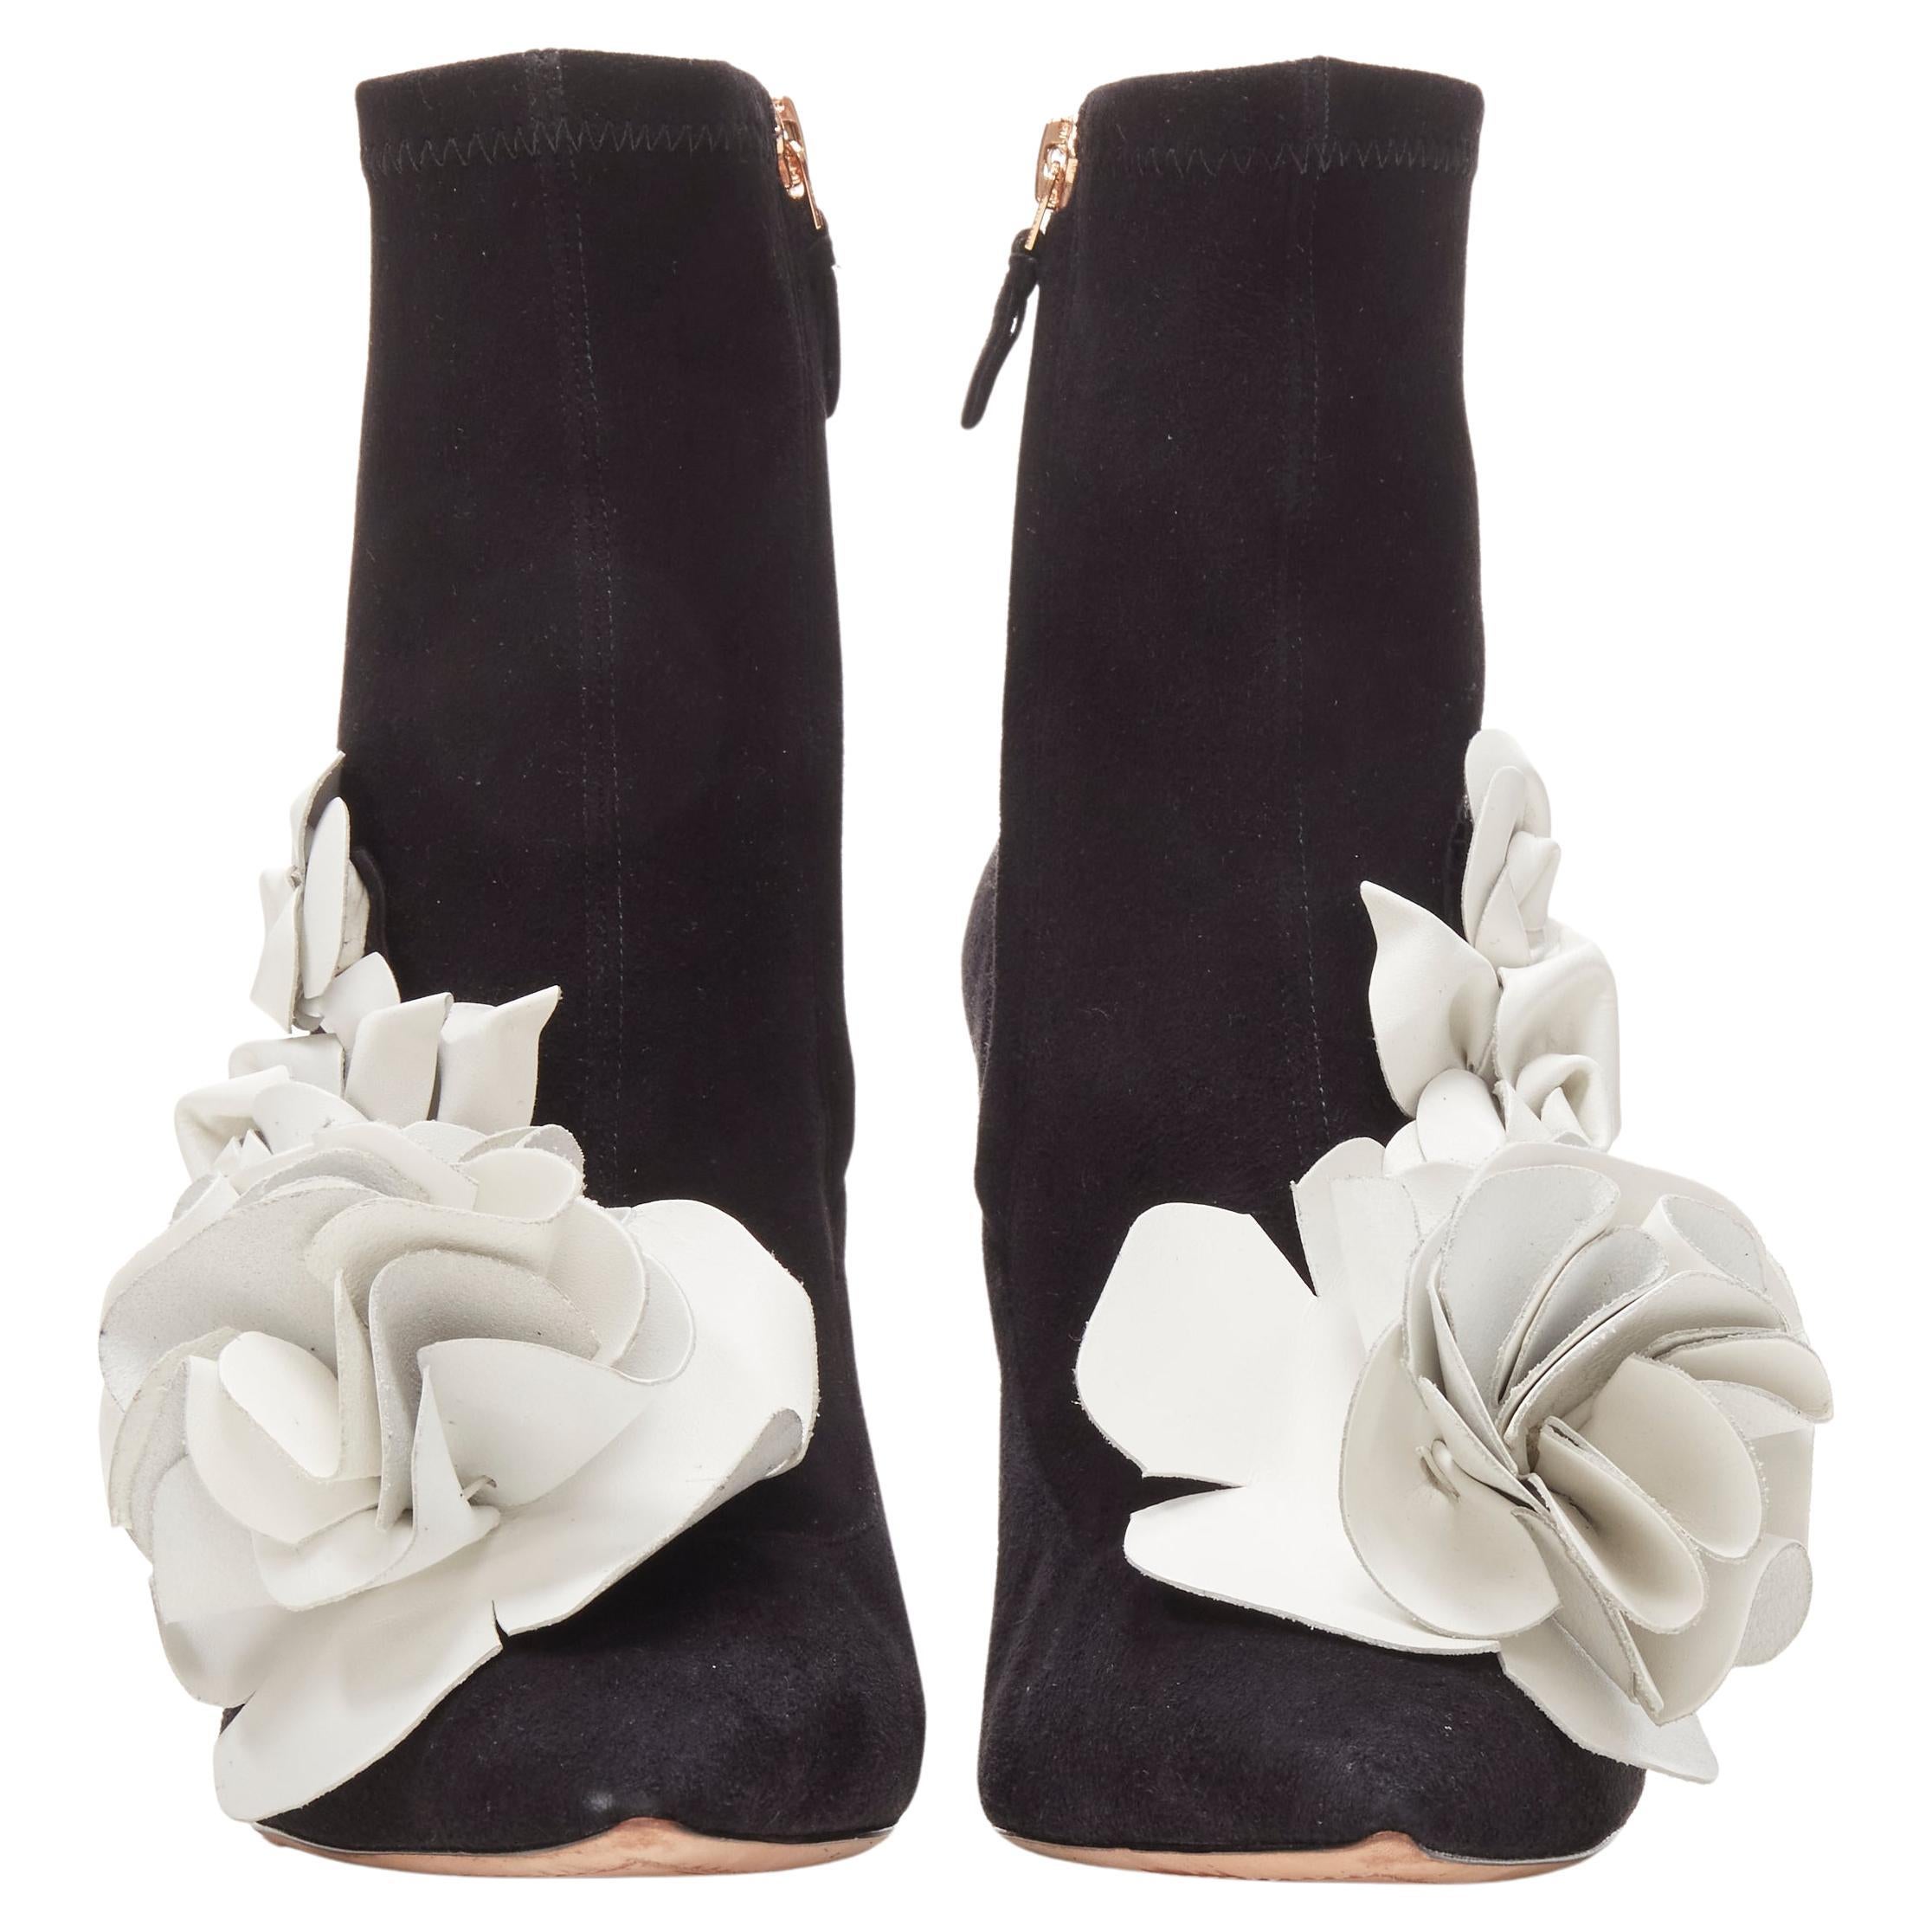 SOPHIA WEBSTER Jimbo Lilico black suede floral applique pointy bootie EU38.5
Brand: Sophia Webster
Extra Detail: 3D floral petal applique. Side zip closure.

CONDITION:
Condition: Very good, this item was pre-owned and is in very good condition.